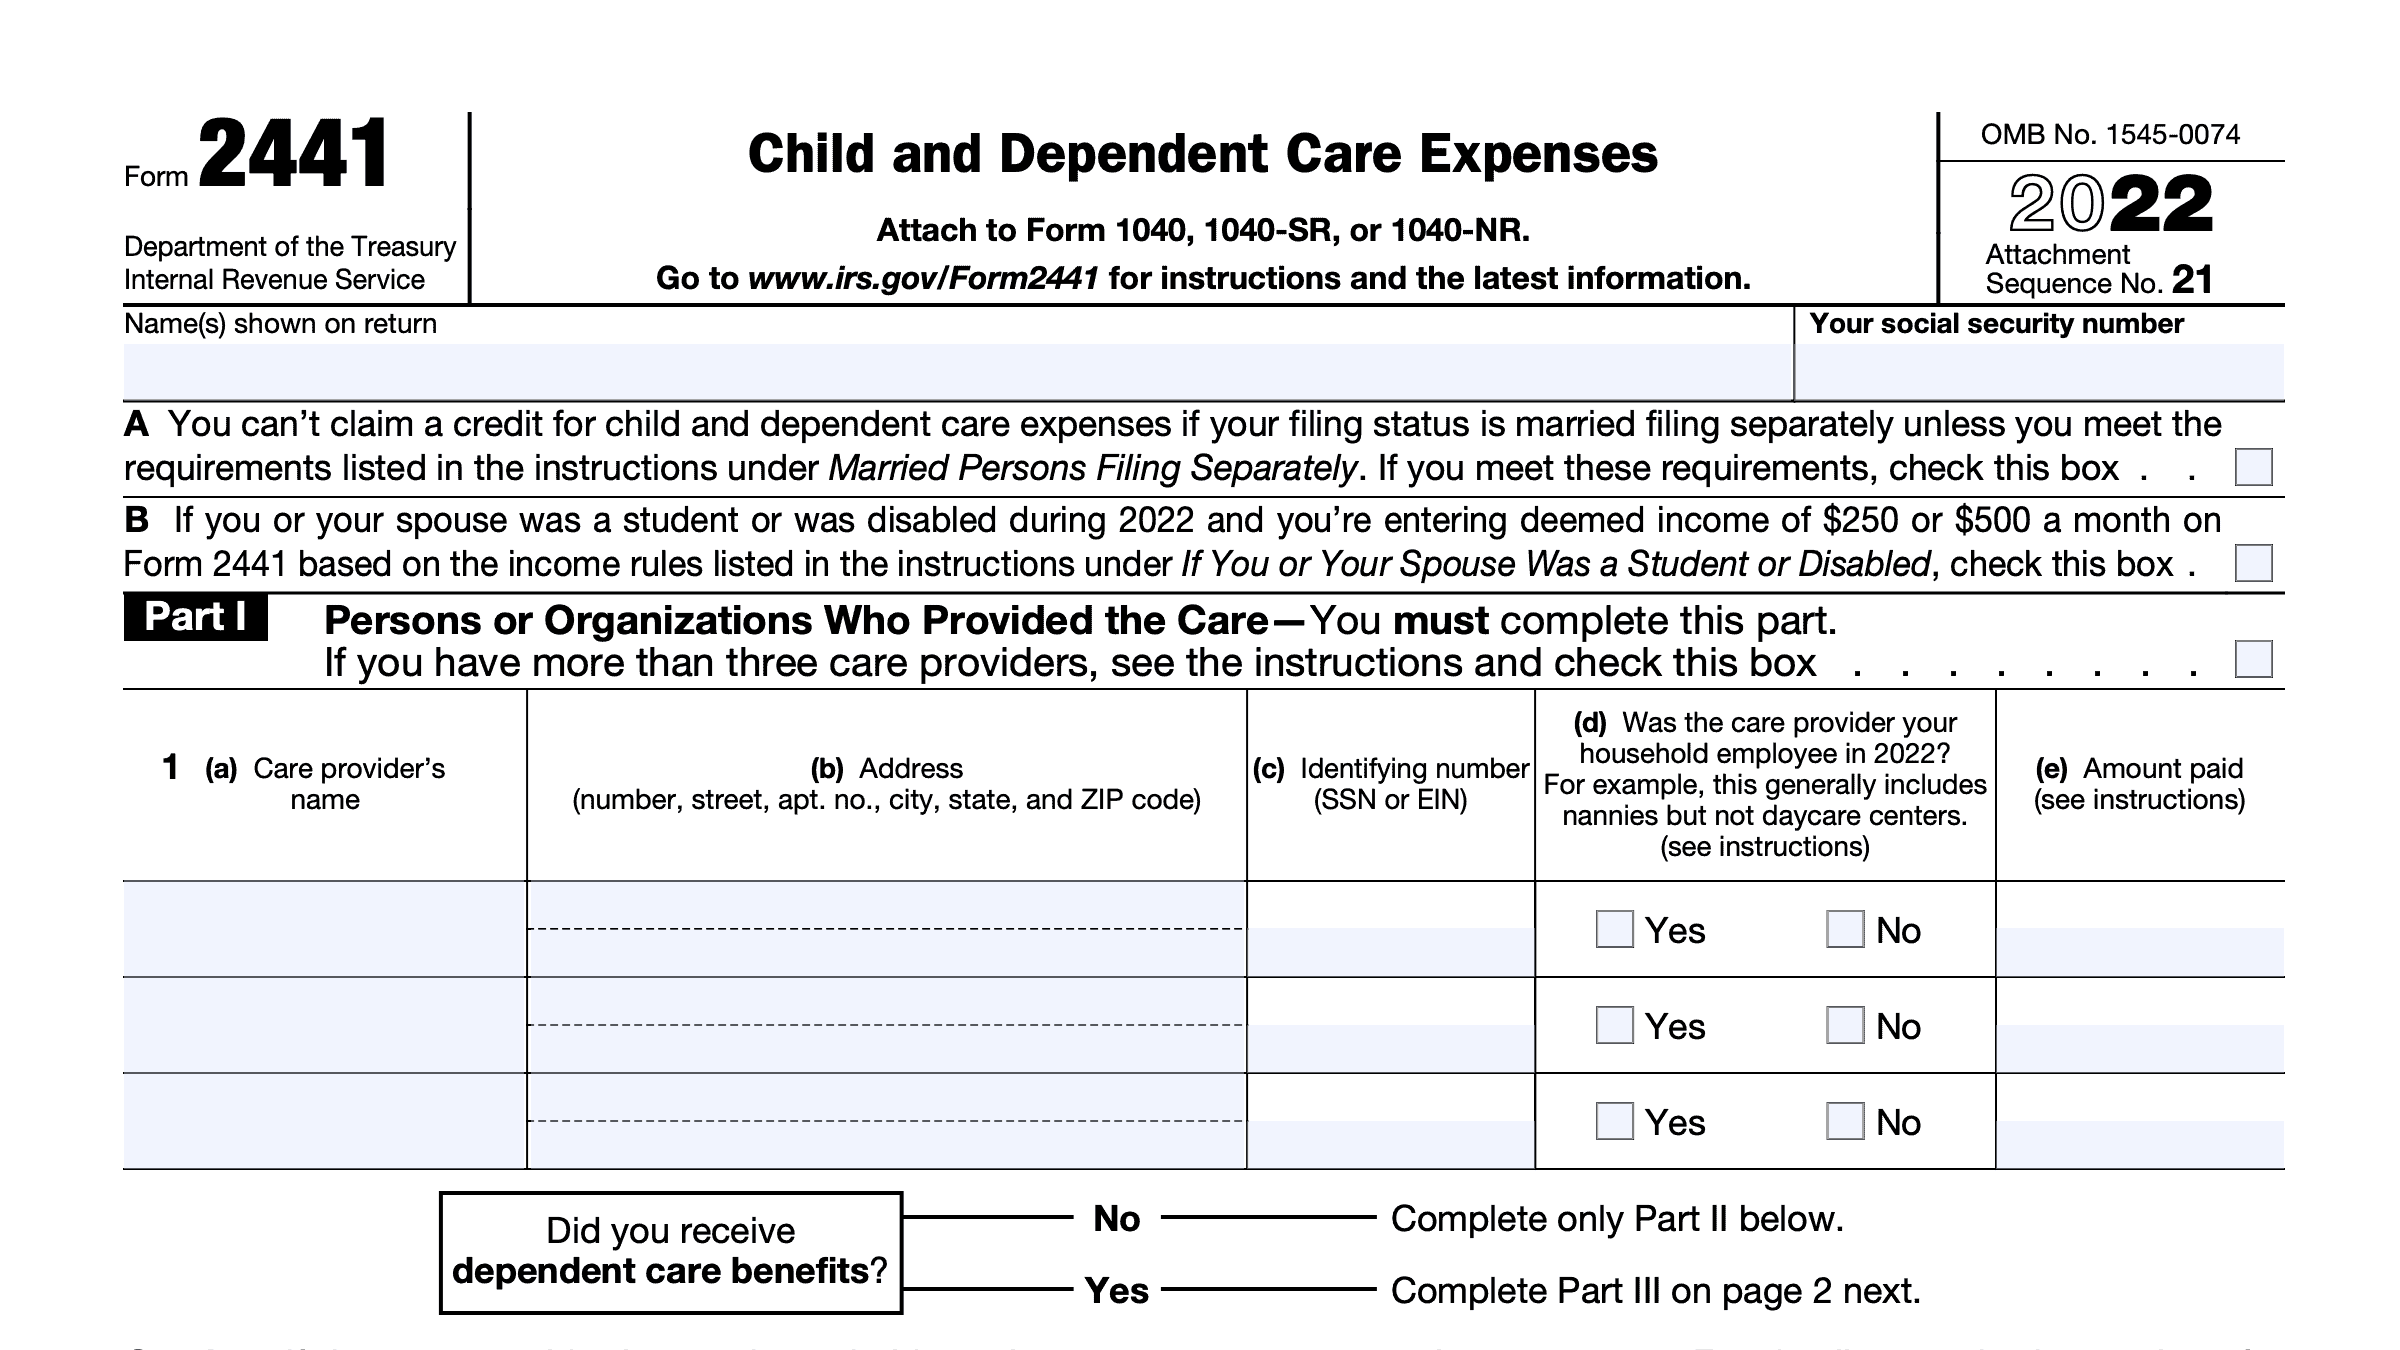 irs-form-2441-instructions-child-and-dependent-care-expenses